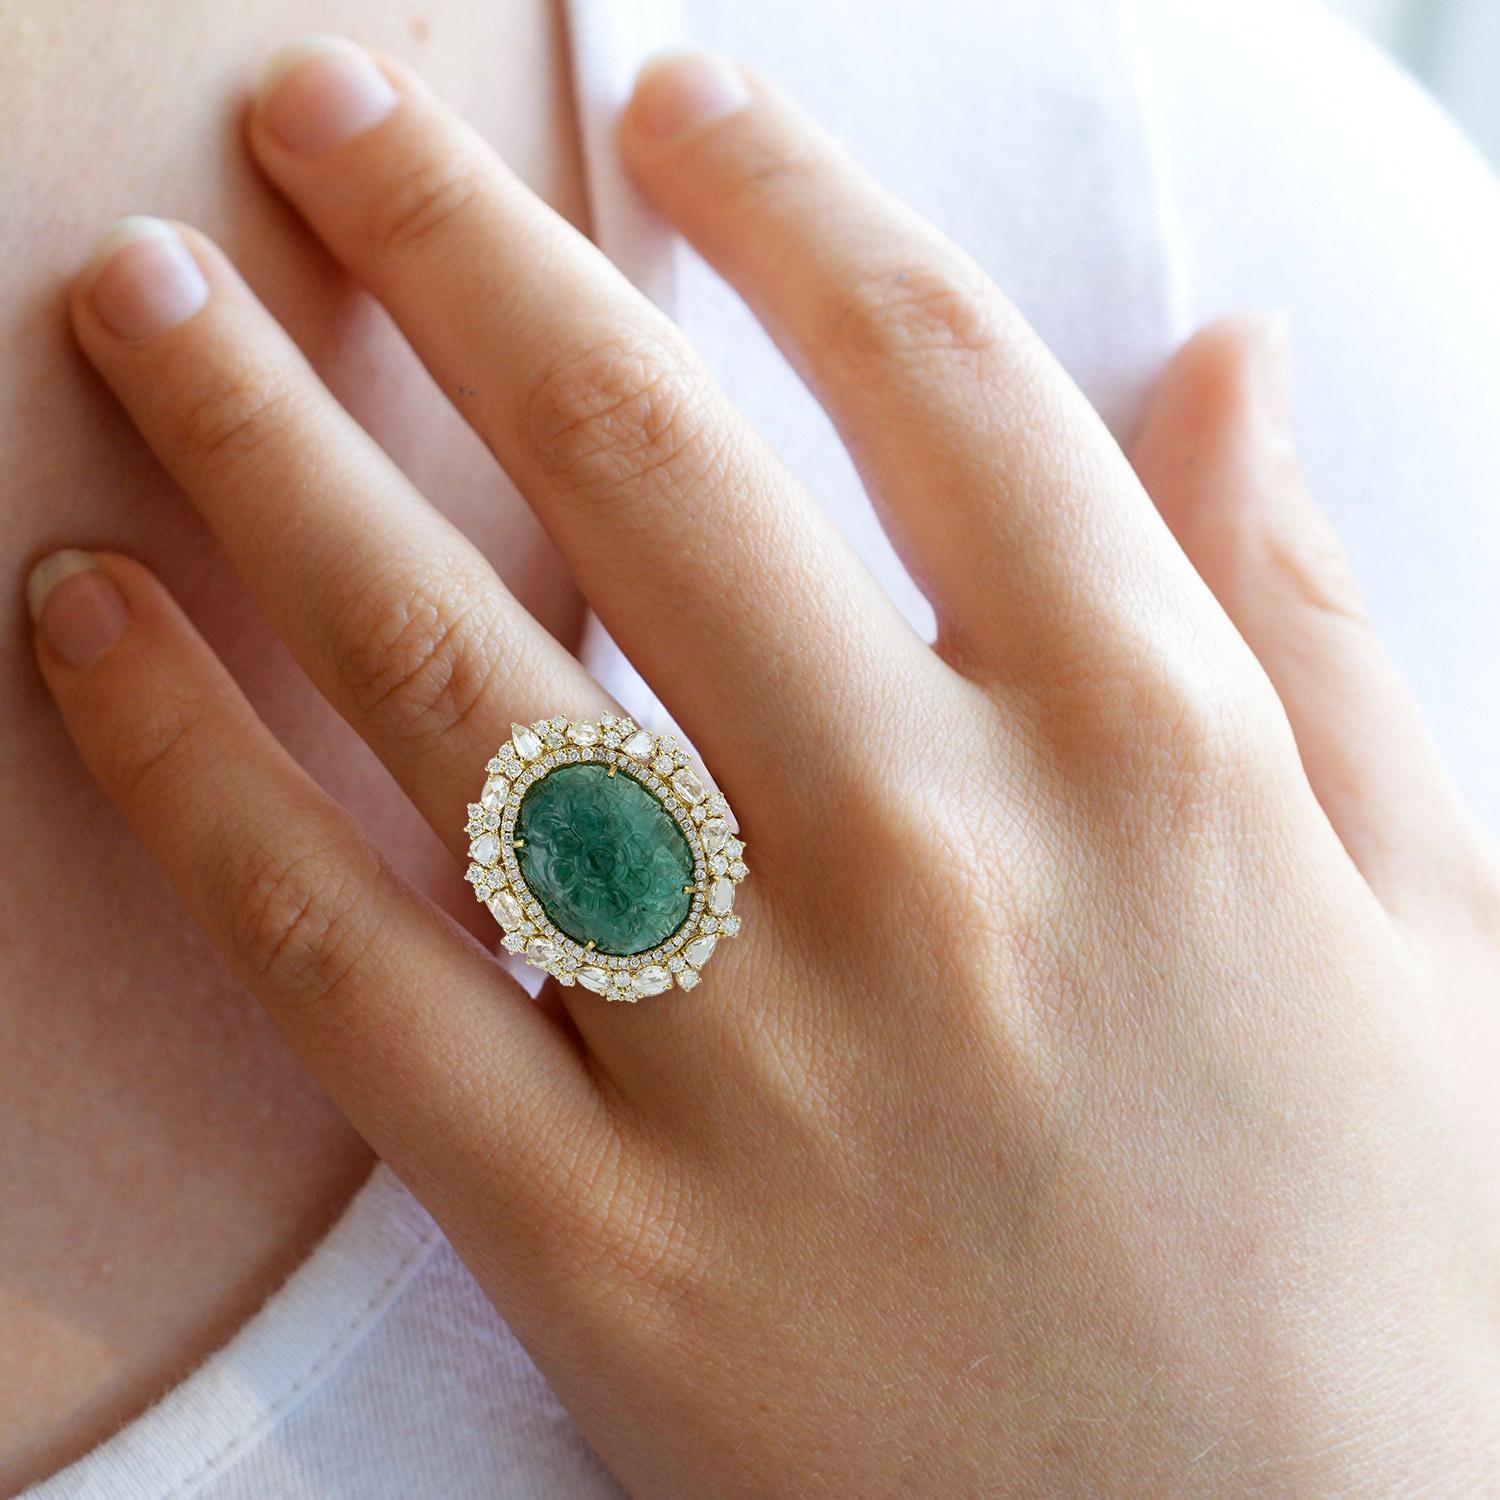 A stunning statement ring cast in 18-karat gold. It is hand set in 15.74 carats carved emerald & illuminated with 2.9 carats of sparkling diamonds. 

The ring is a size 7 and may be resized to larger or smaller upon request. 
FOLLOW MEGHNA JEWELS